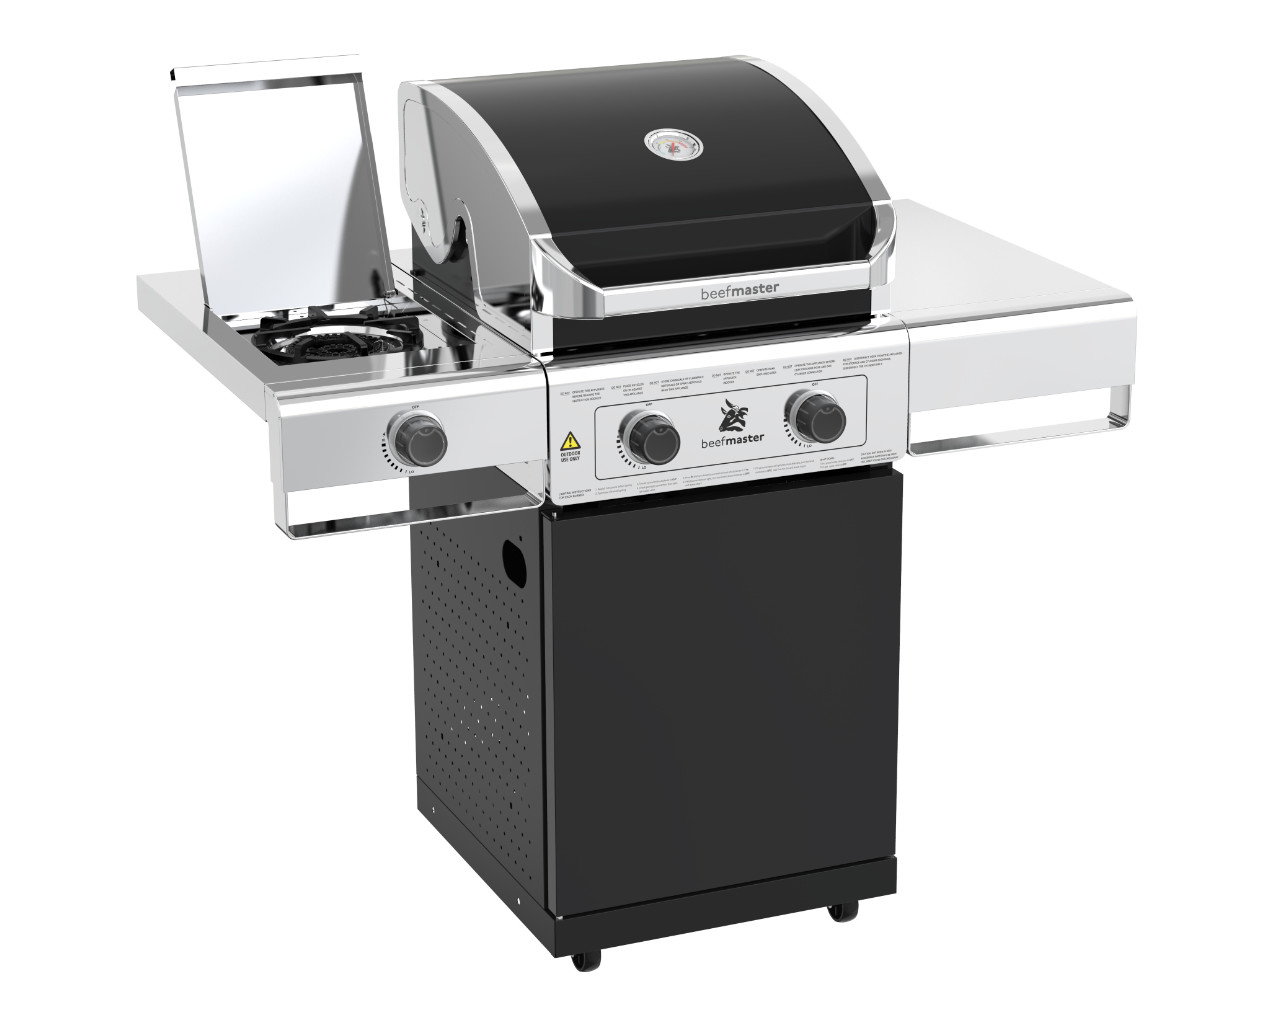 Beefmaster Classic 2 Burner BBQ on Classic Cart with Cast Iron Side Burner, , hi-res image number null